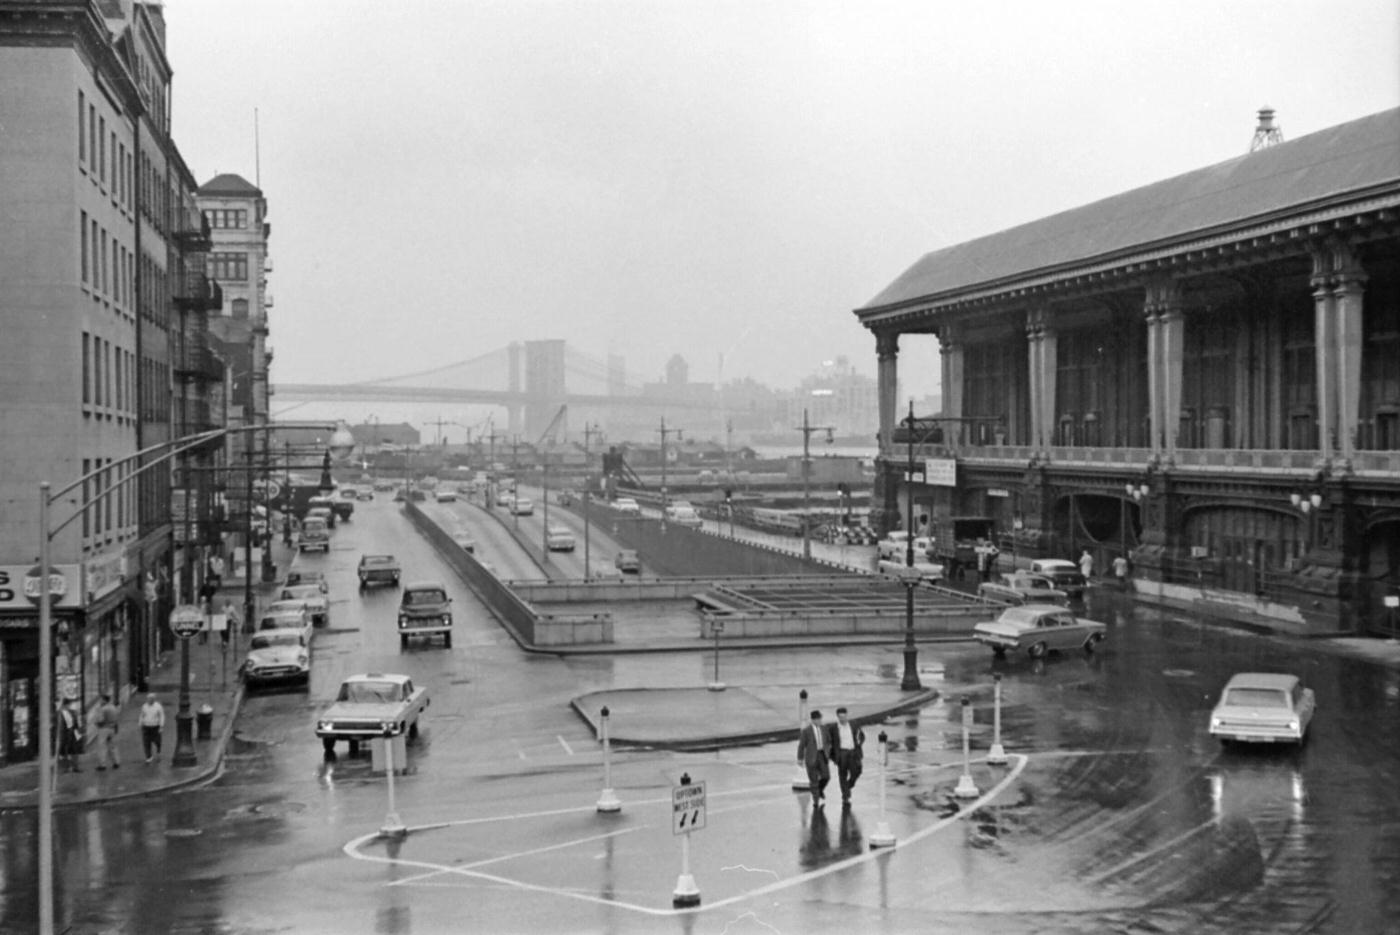 A View Of The Battery Maritime Building And The Fdr Drive At South Ferry In Lower Manhattan, 1965.